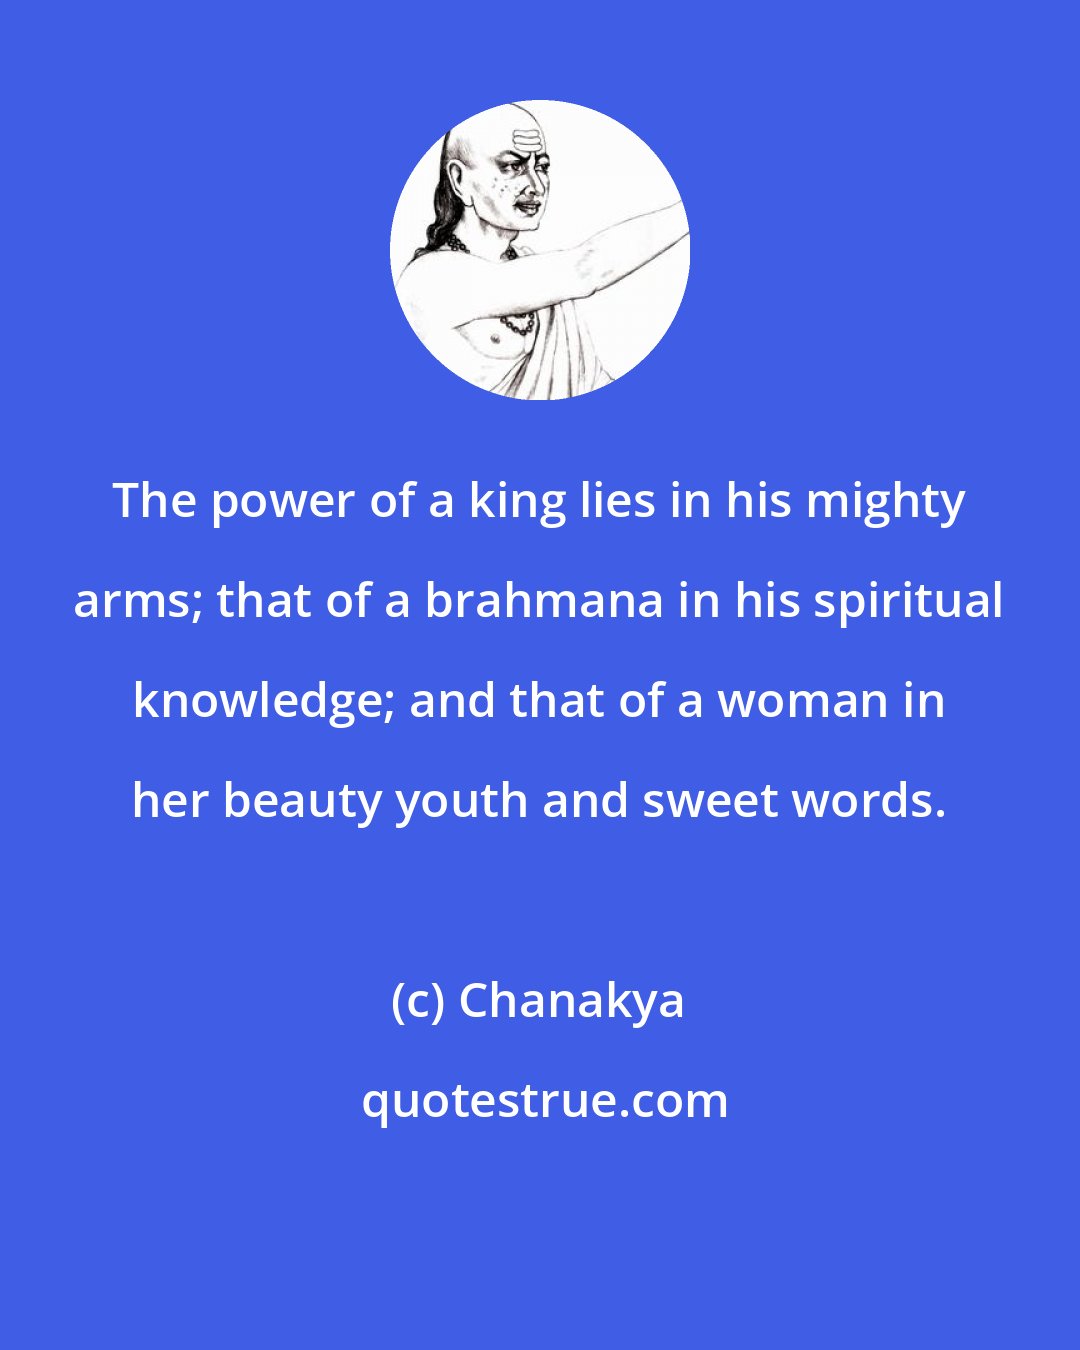 Chanakya: The power of a king lies in his mighty arms; that of a brahmana in his spiritual knowledge; and that of a woman in her beauty youth and sweet words.